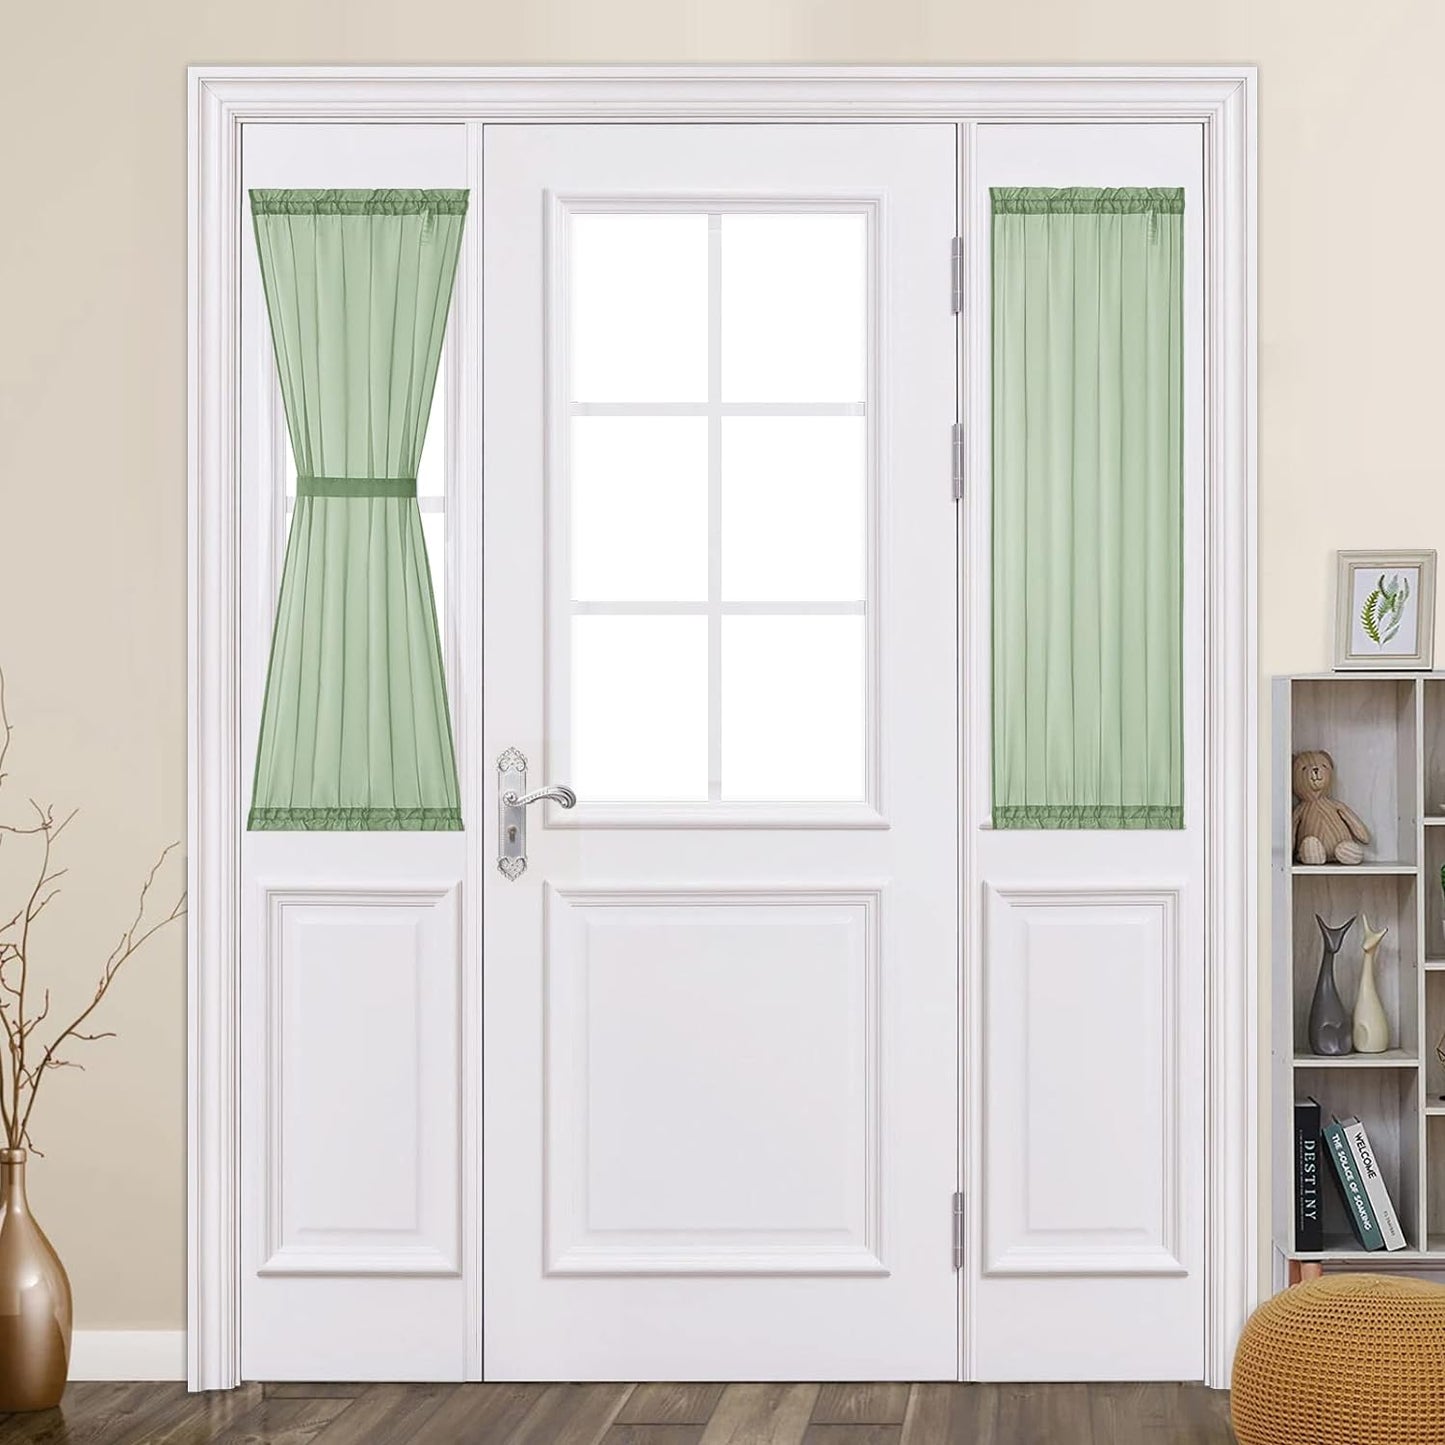 MIULEE French Door Sheer Curtains for Front Back Patio Glass Door Light Filtering Window Treatment with 2 Tiebacks 54 Wide and 72 Inches Length, White, Set of 2  MIULEE Sage Green 25"W X 40"L 